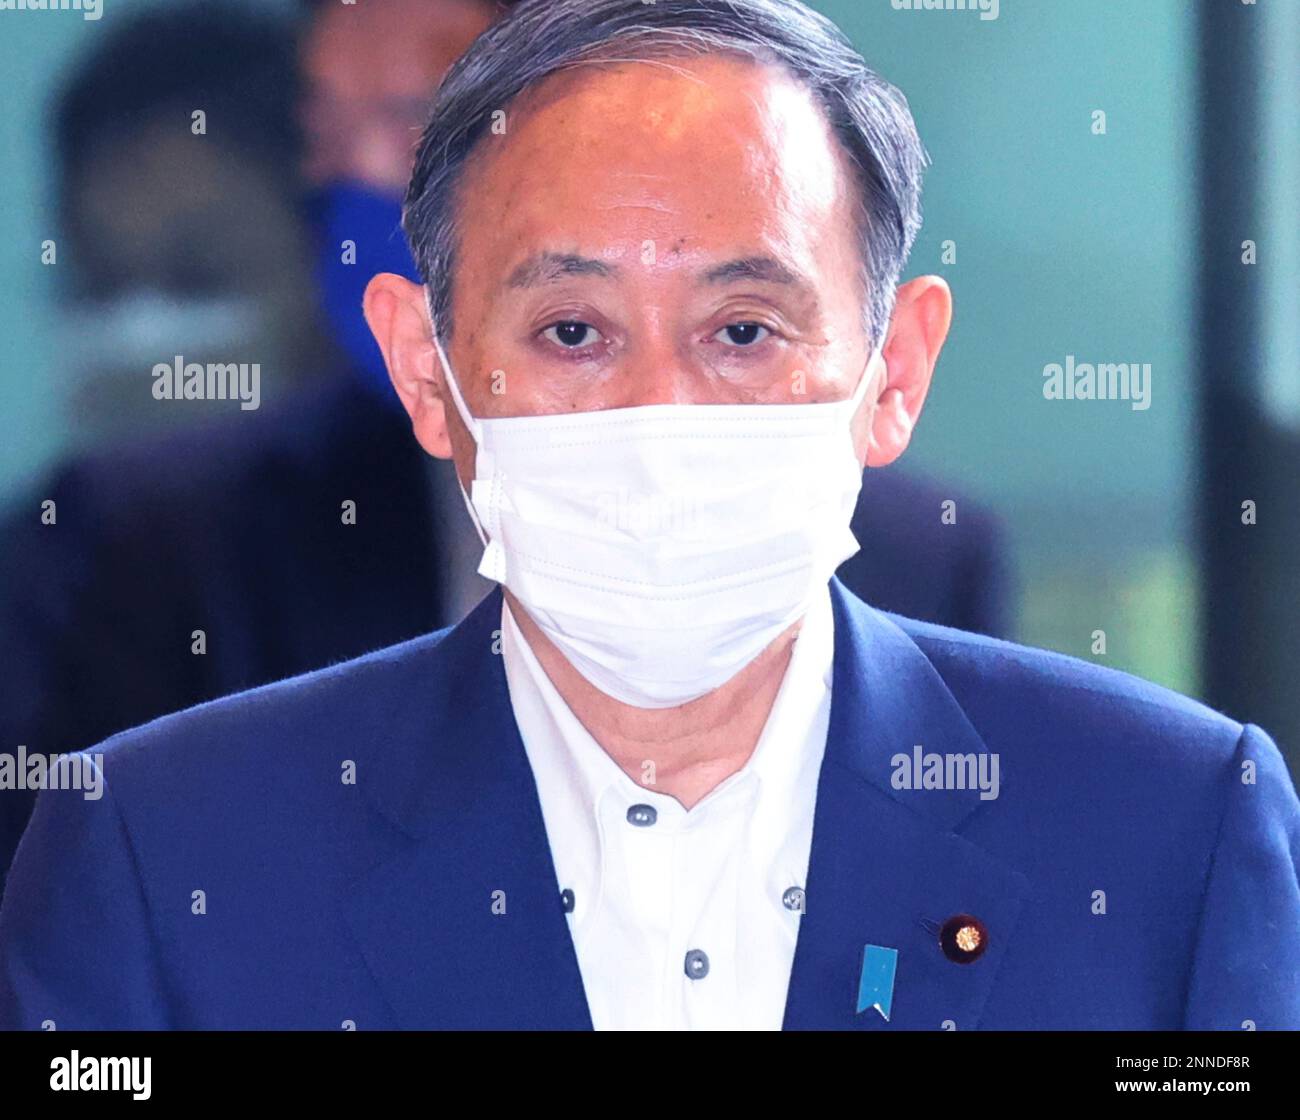 Japan's Prime Minister Yoshihide Suga arrives at the prime minister's  office in Tokyo on May 6, 2021. Suga wearing face mask entered his office  amid continuing worries over the new coronavirus COVID-19. (